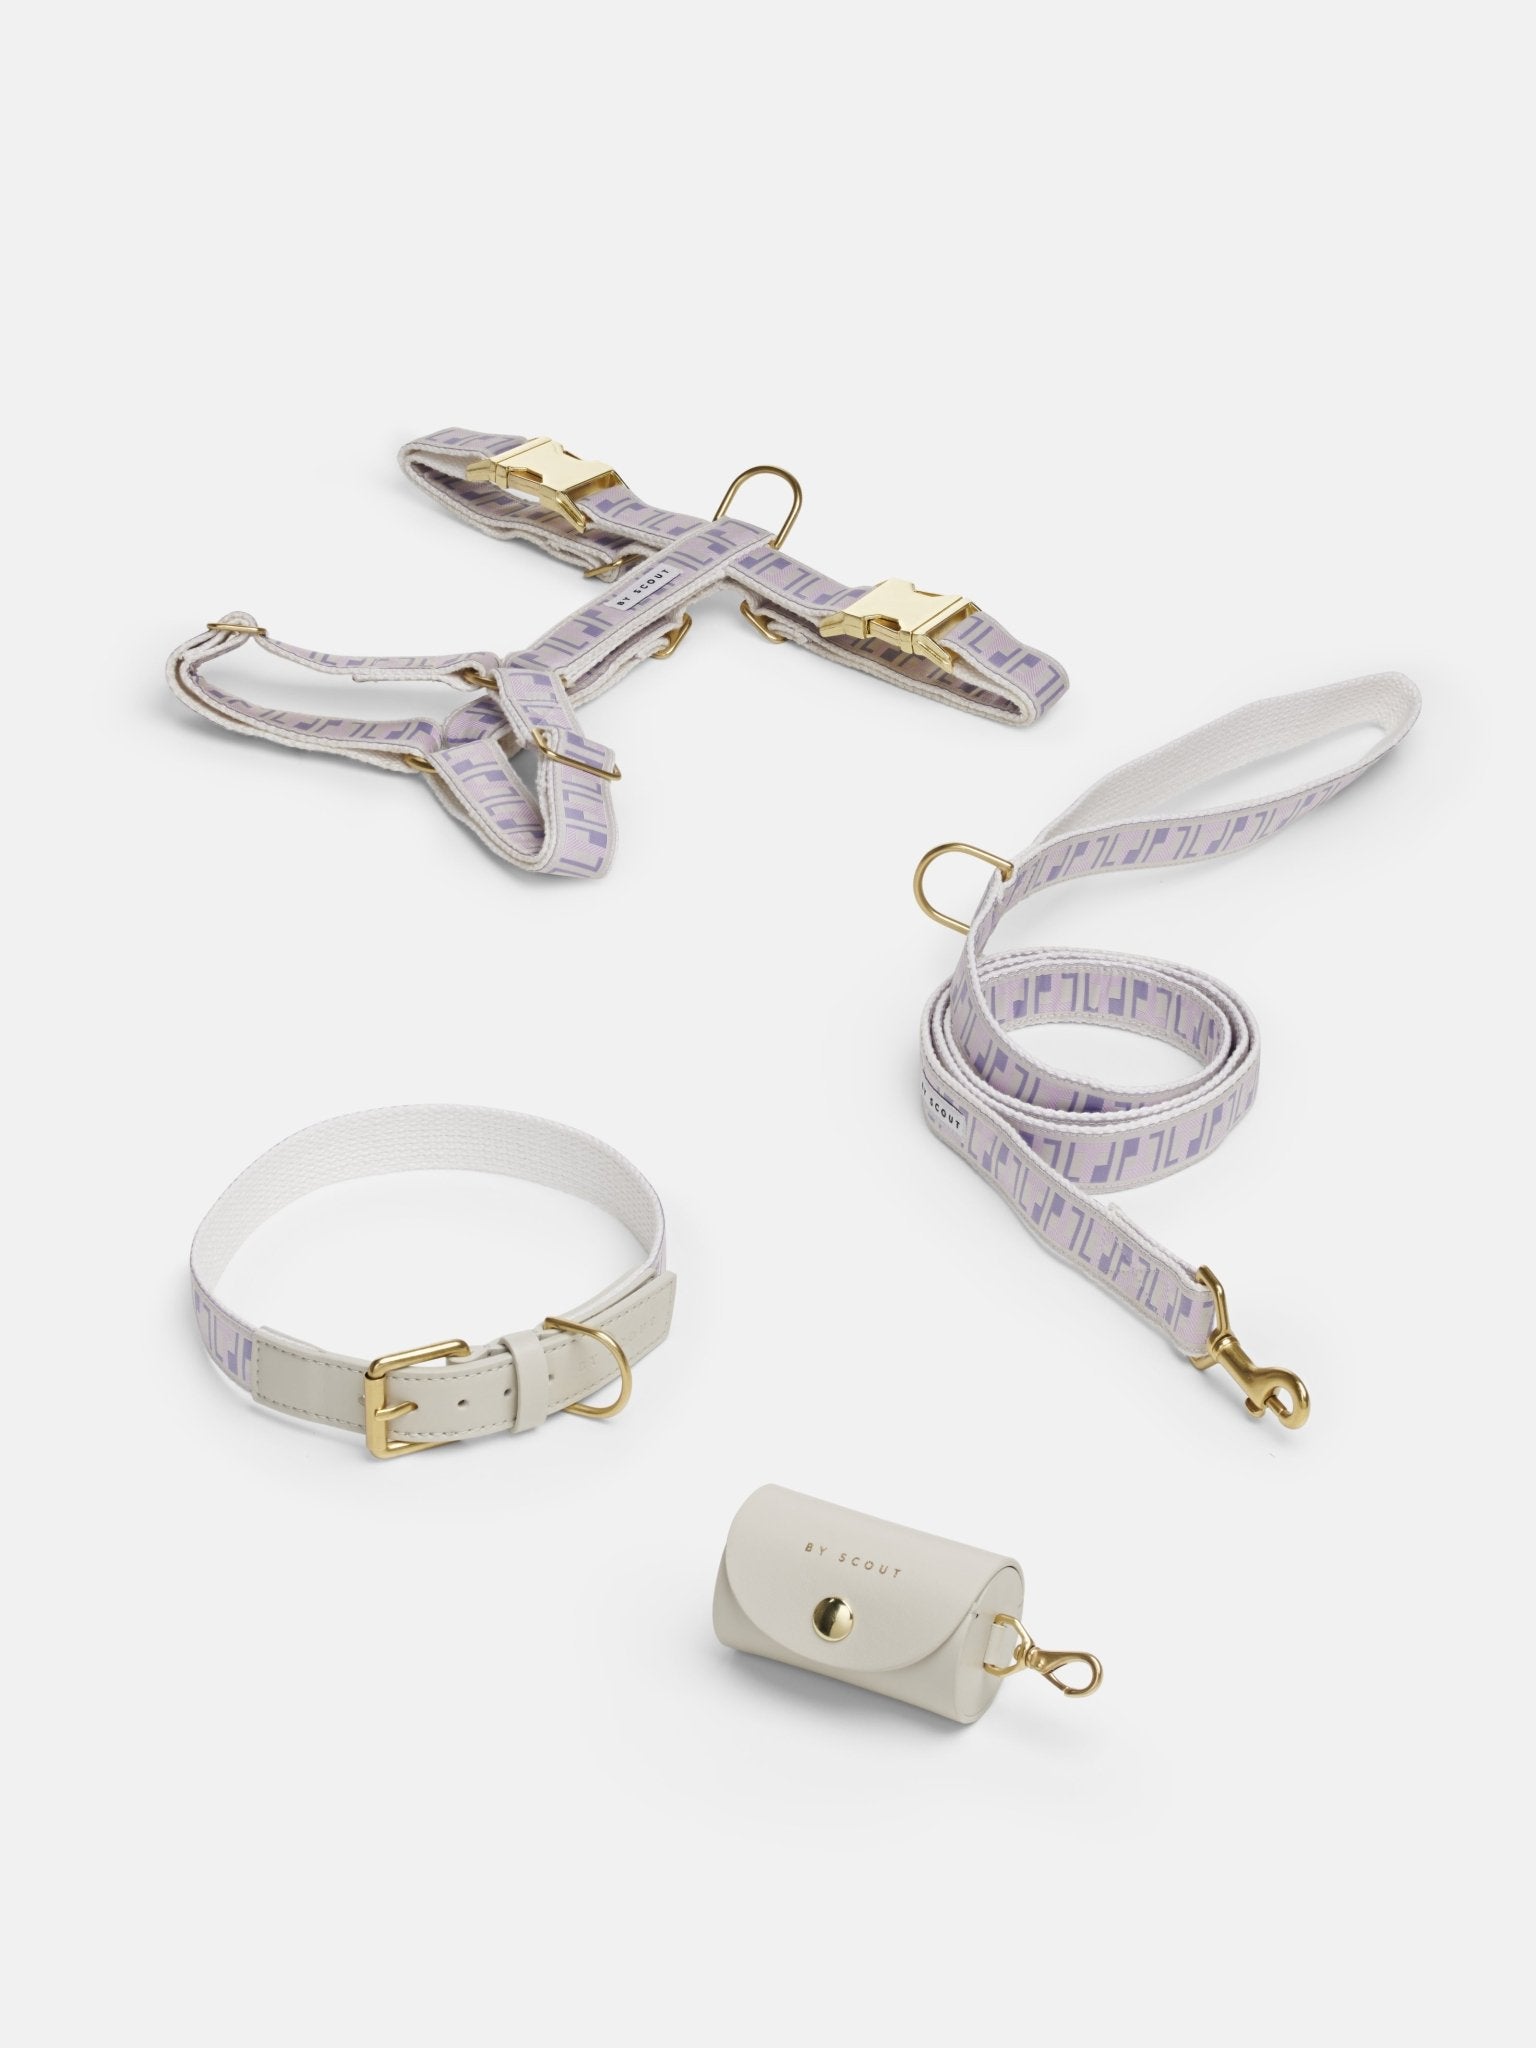 Trove Standard Length Leash - Lilac / Pinks - By Scout